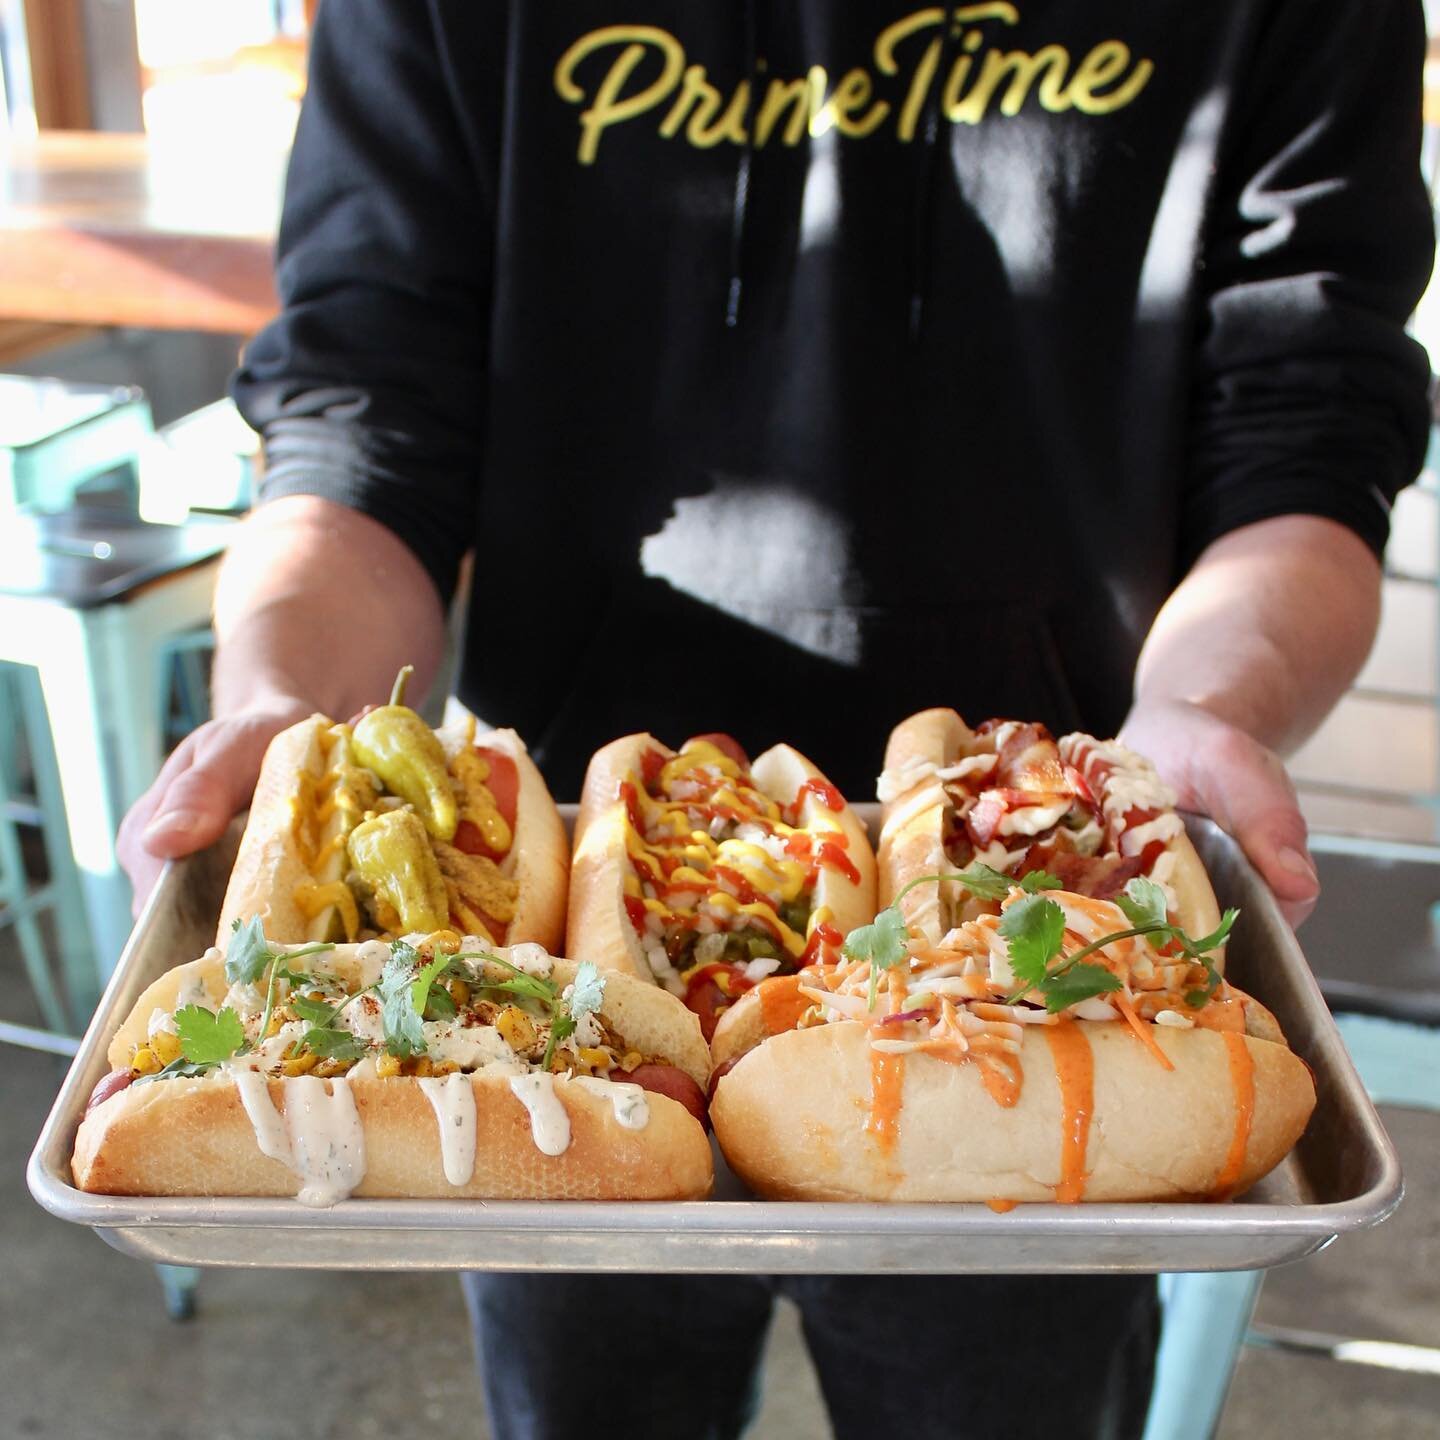 Goodbye tacos, hello hot dogs!
We&rsquo;ve switched up our tasting room menu and we are excited to bring these changes to you. Now, before we get ahead of ourselves, we want to let you know that our tacos will still be available at @lonsdalebridgedec